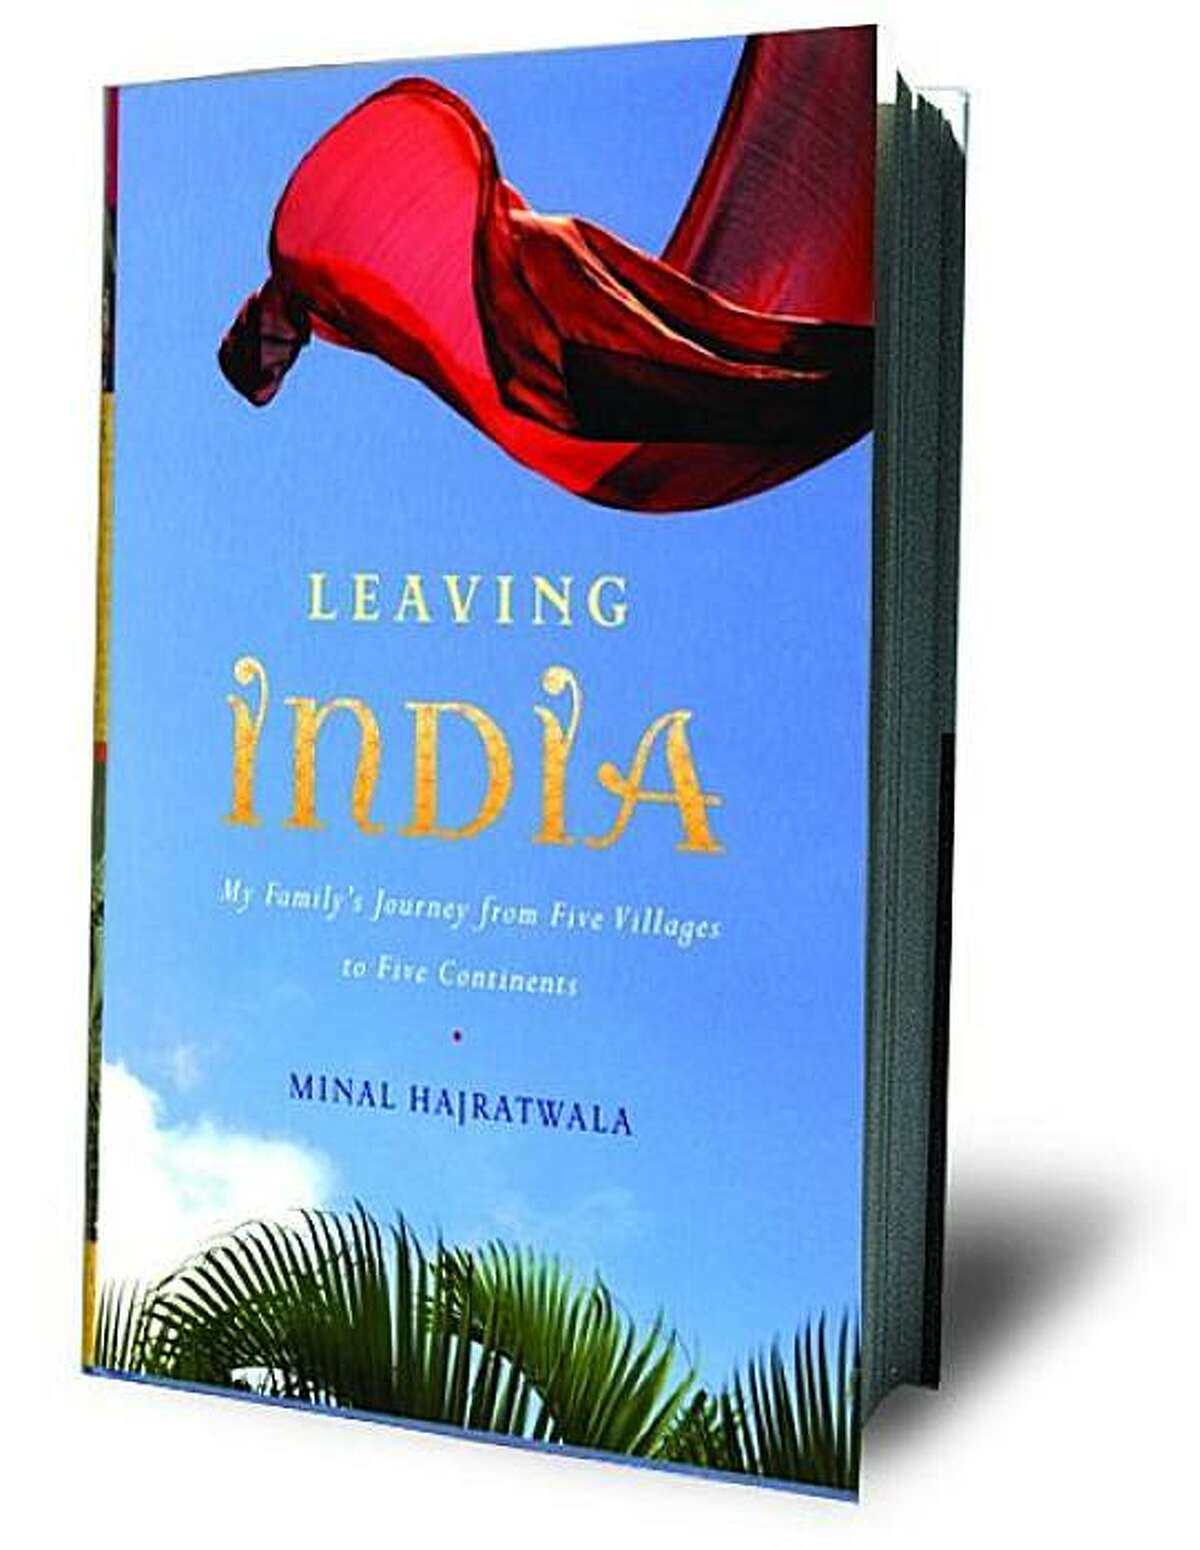 "Leaving India" by Minal Hajratwala is published by Houghton Mifflin Harcourt.